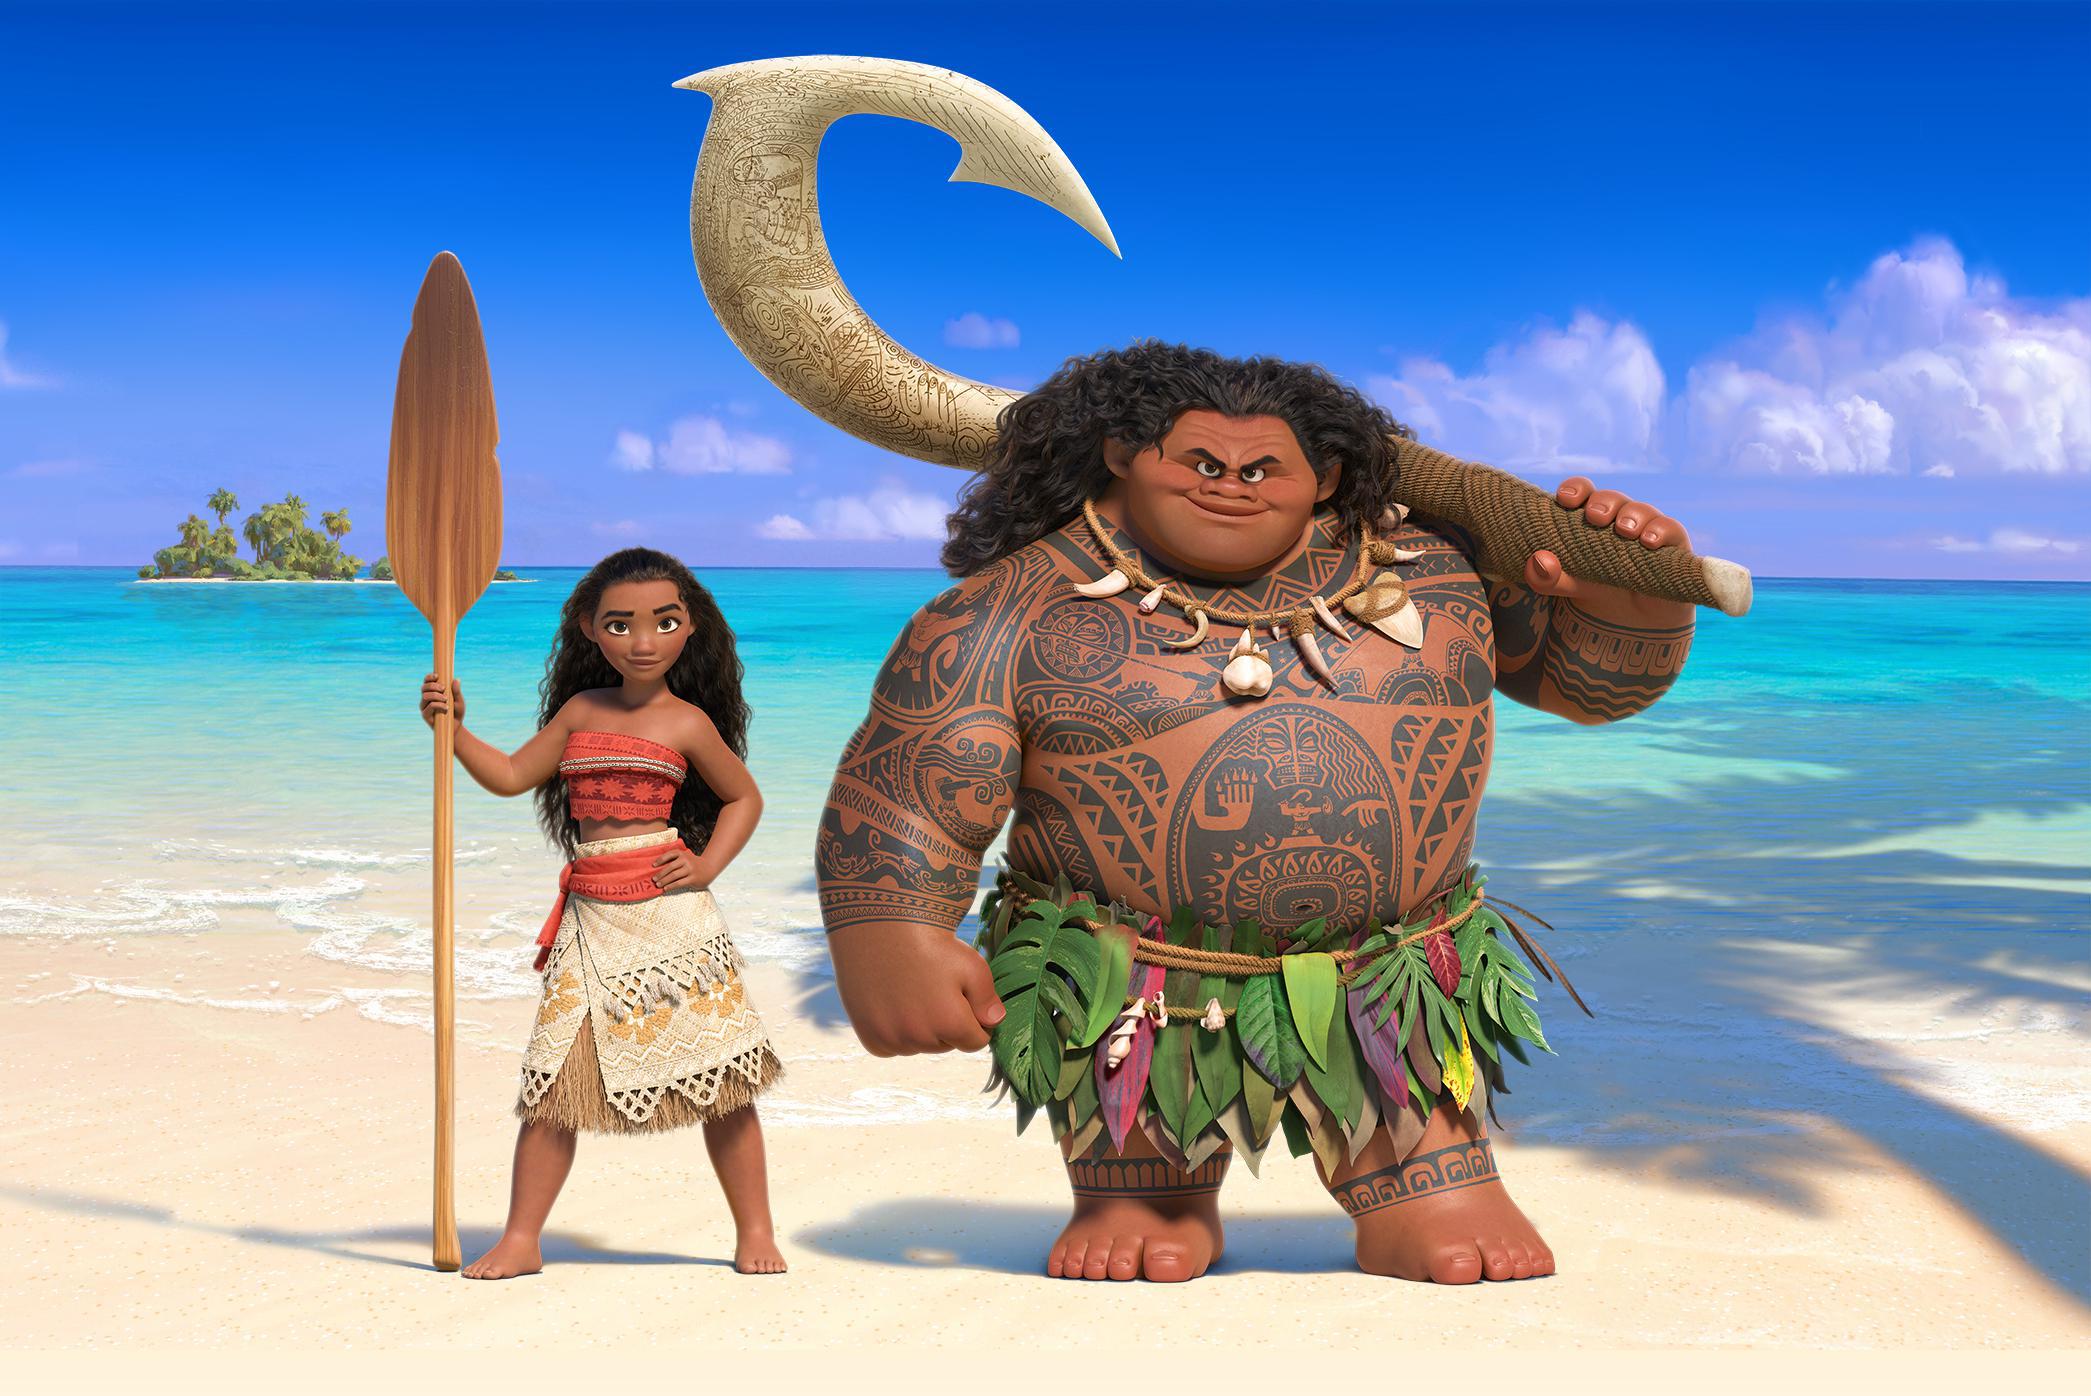 Disney reveals plans for ‘Moana 2’ and Taylor Swift’s involvement, and partners with Epic Games to build an expansive ‘Disney universe’